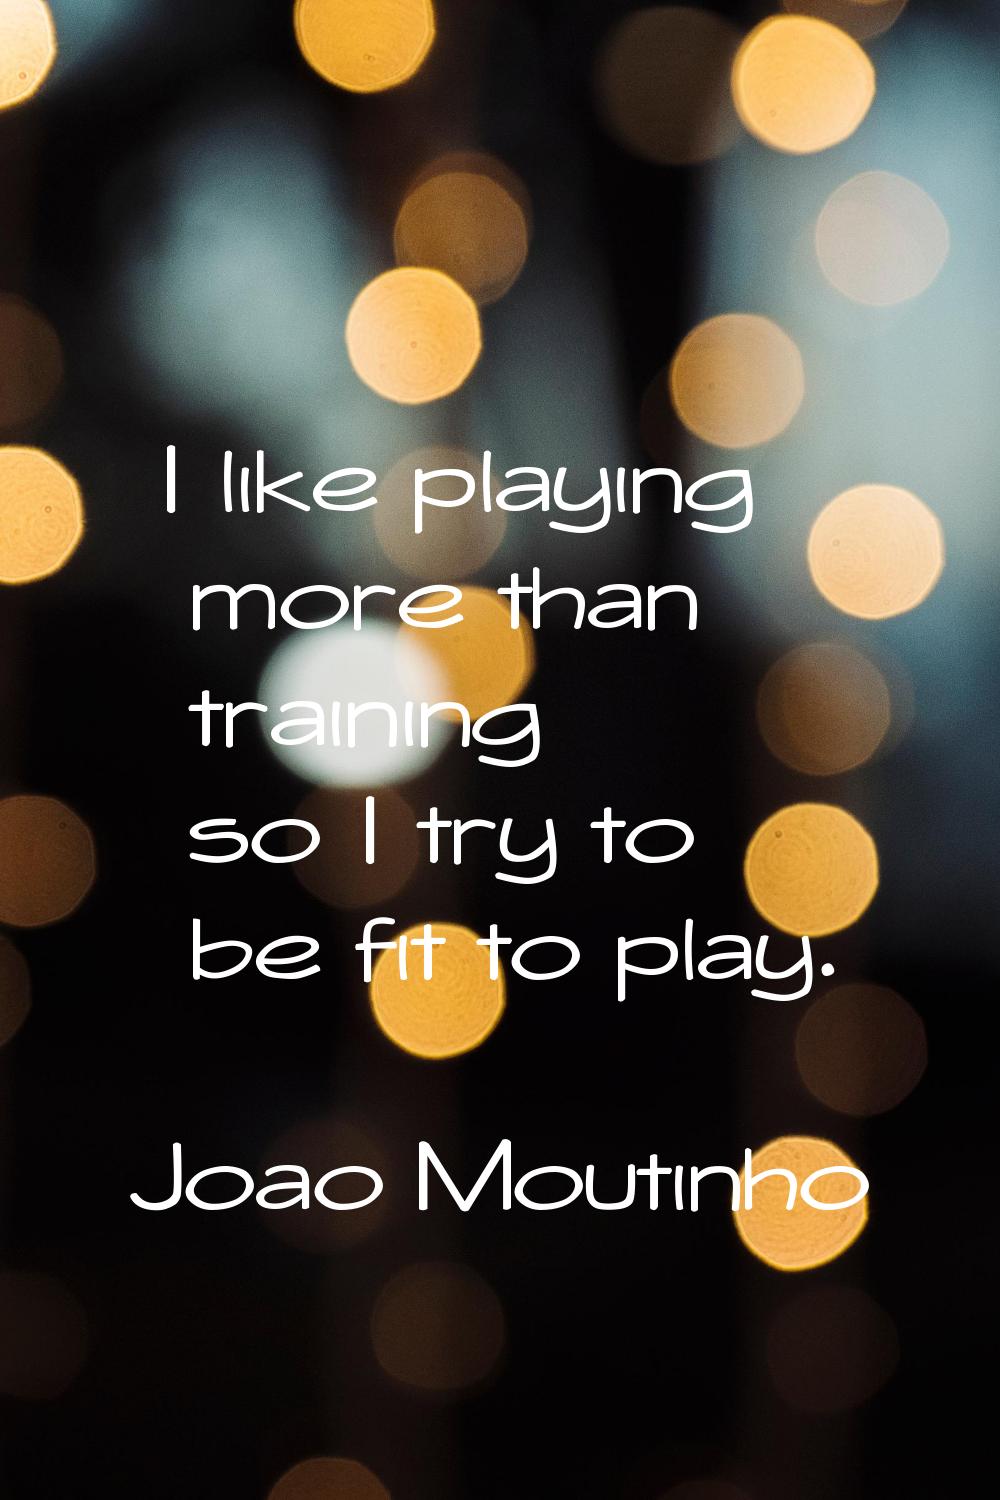 I like playing more than training so I try to be fit to play.